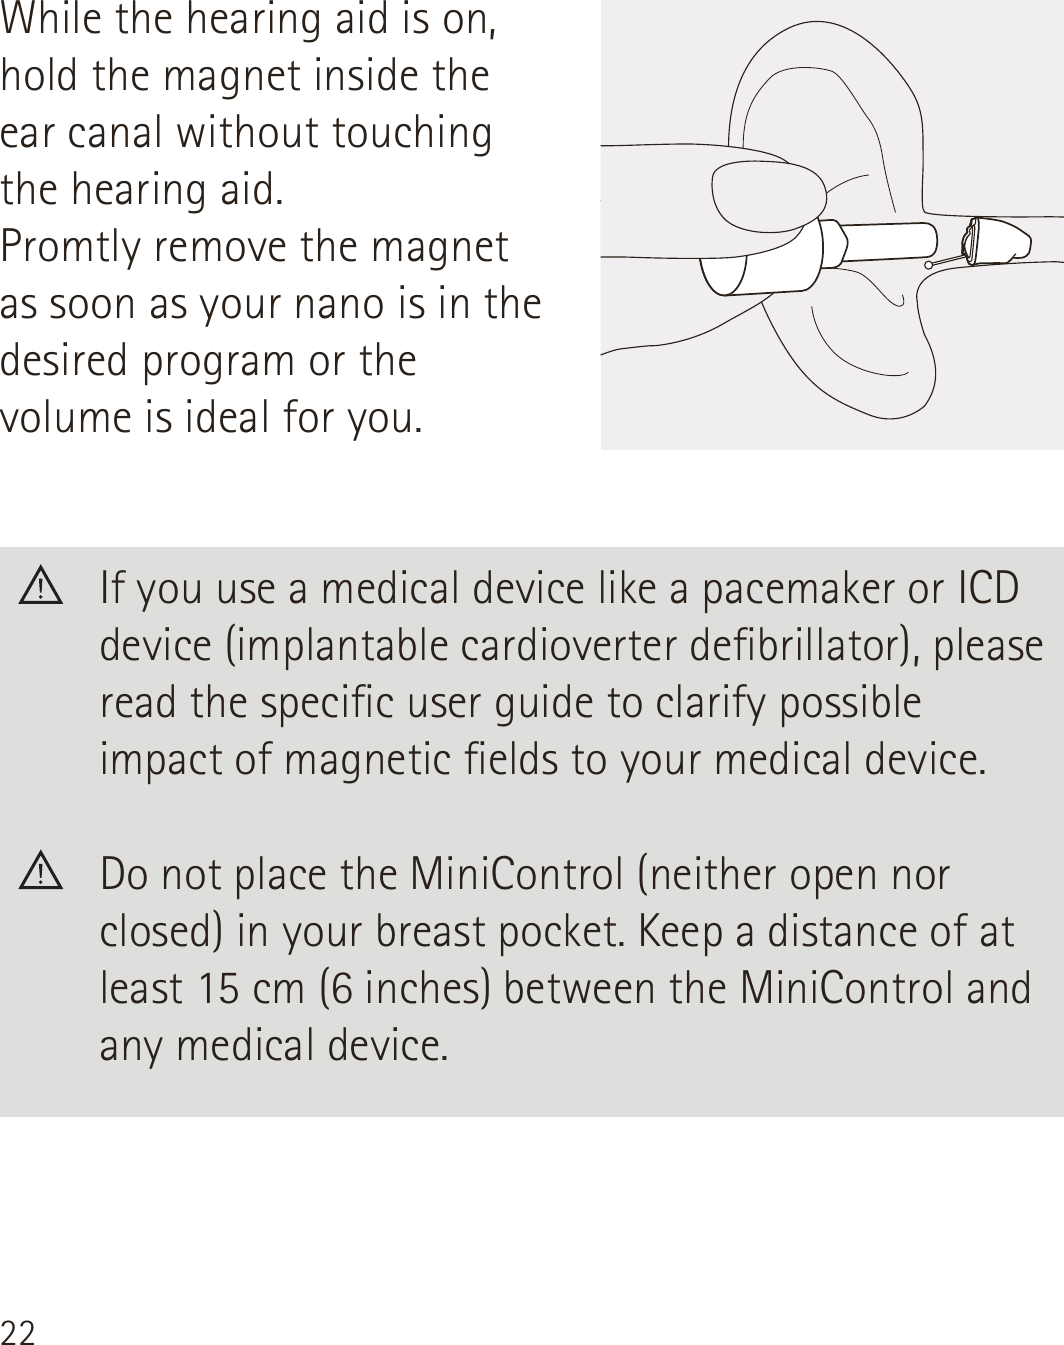 22  If you use a medical device like a pacemaker or ICD device (implantable cardioverter debrillator), please read the specic user guide to clarify possible impact of magnetic elds to your medical device.  Do not place the MiniControl (neither open nor closed) in your breast pocket. Keep a distance of at least 15 cm (6 inches) between the MiniControl and any medical device.While the hearing aid is on, hold the magnet inside the ear canal without touching the hearing aid.Promtly remove the magnet as soon as your nano is in the desired program or the volume is ideal for you.